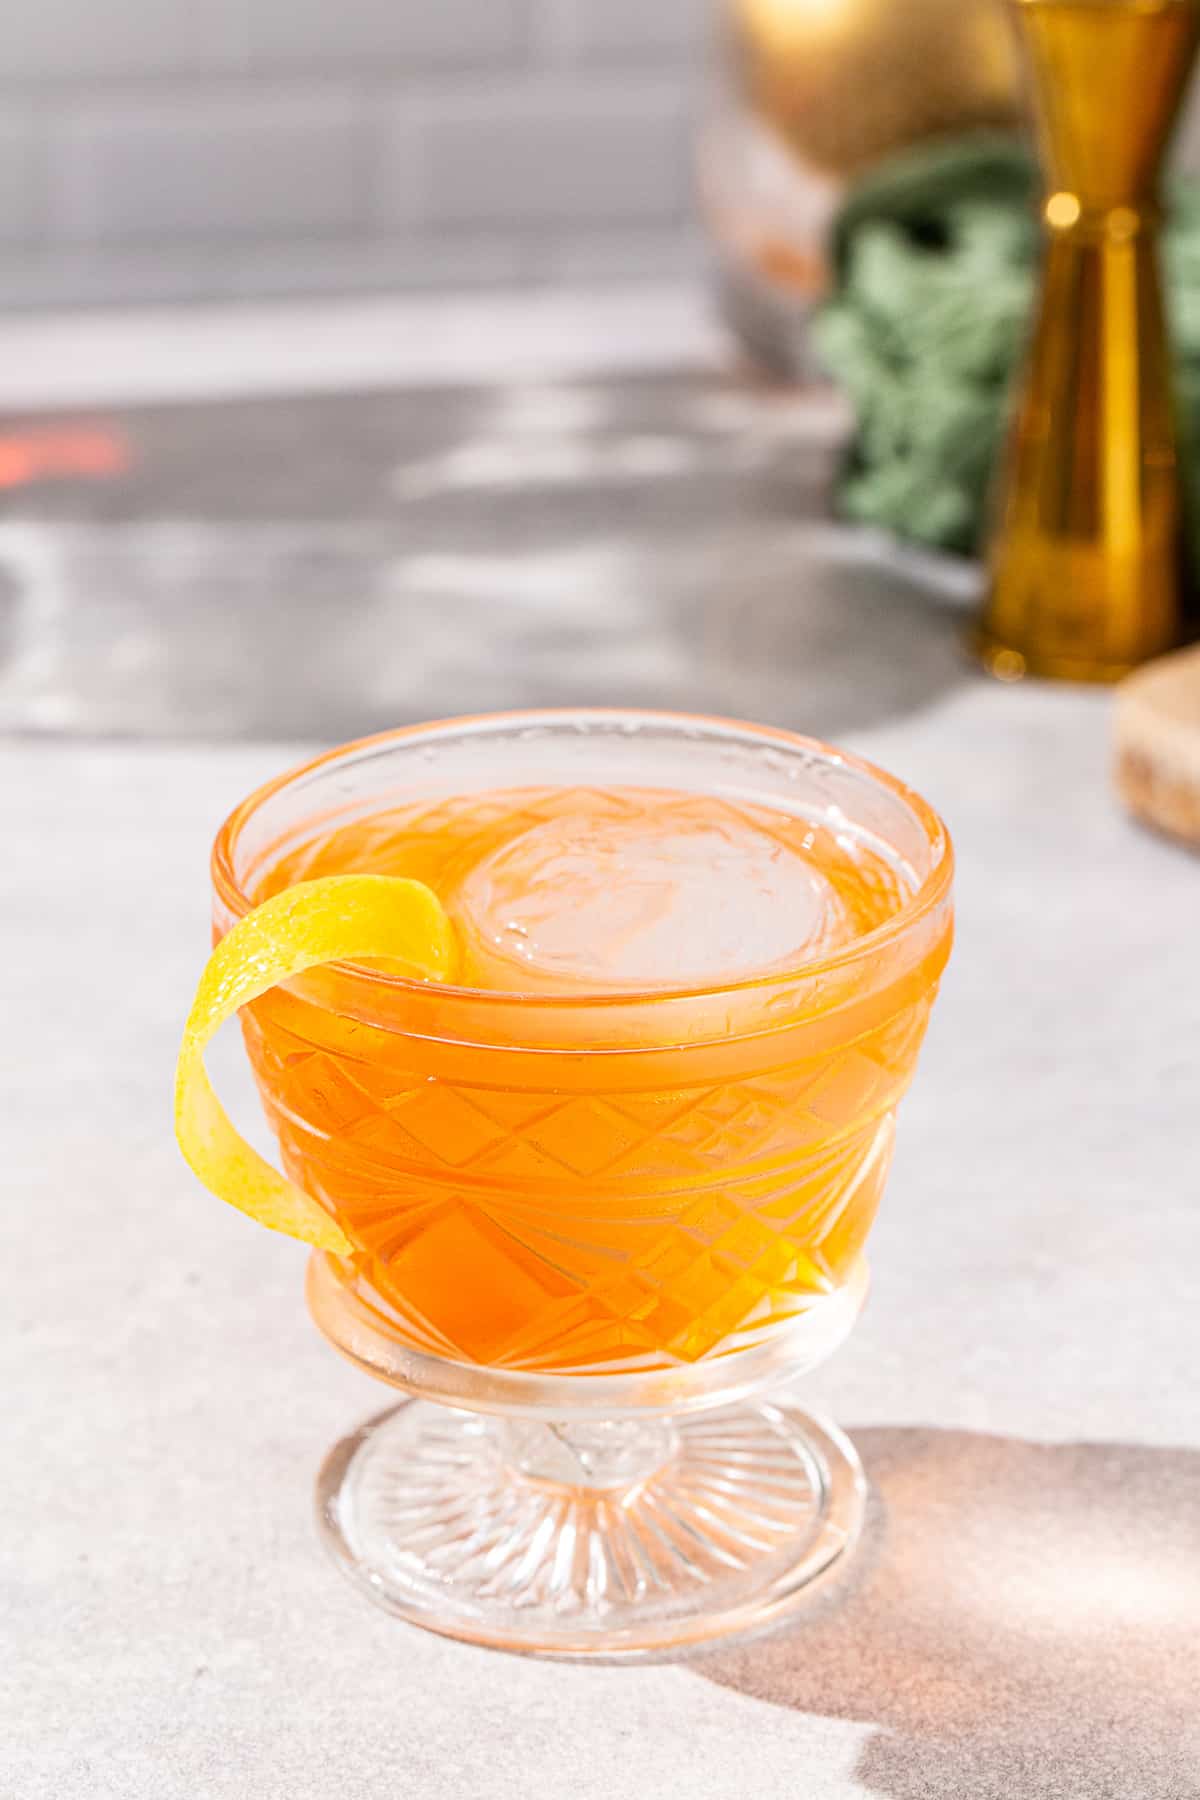 Slight overhead view of Aperol Negroni cocktail in a vintage style cocktail glass. The drink is orange colored and has a yellow lemon peel garnish. A gold colored jigger and a wood cutting board are visible in the background.